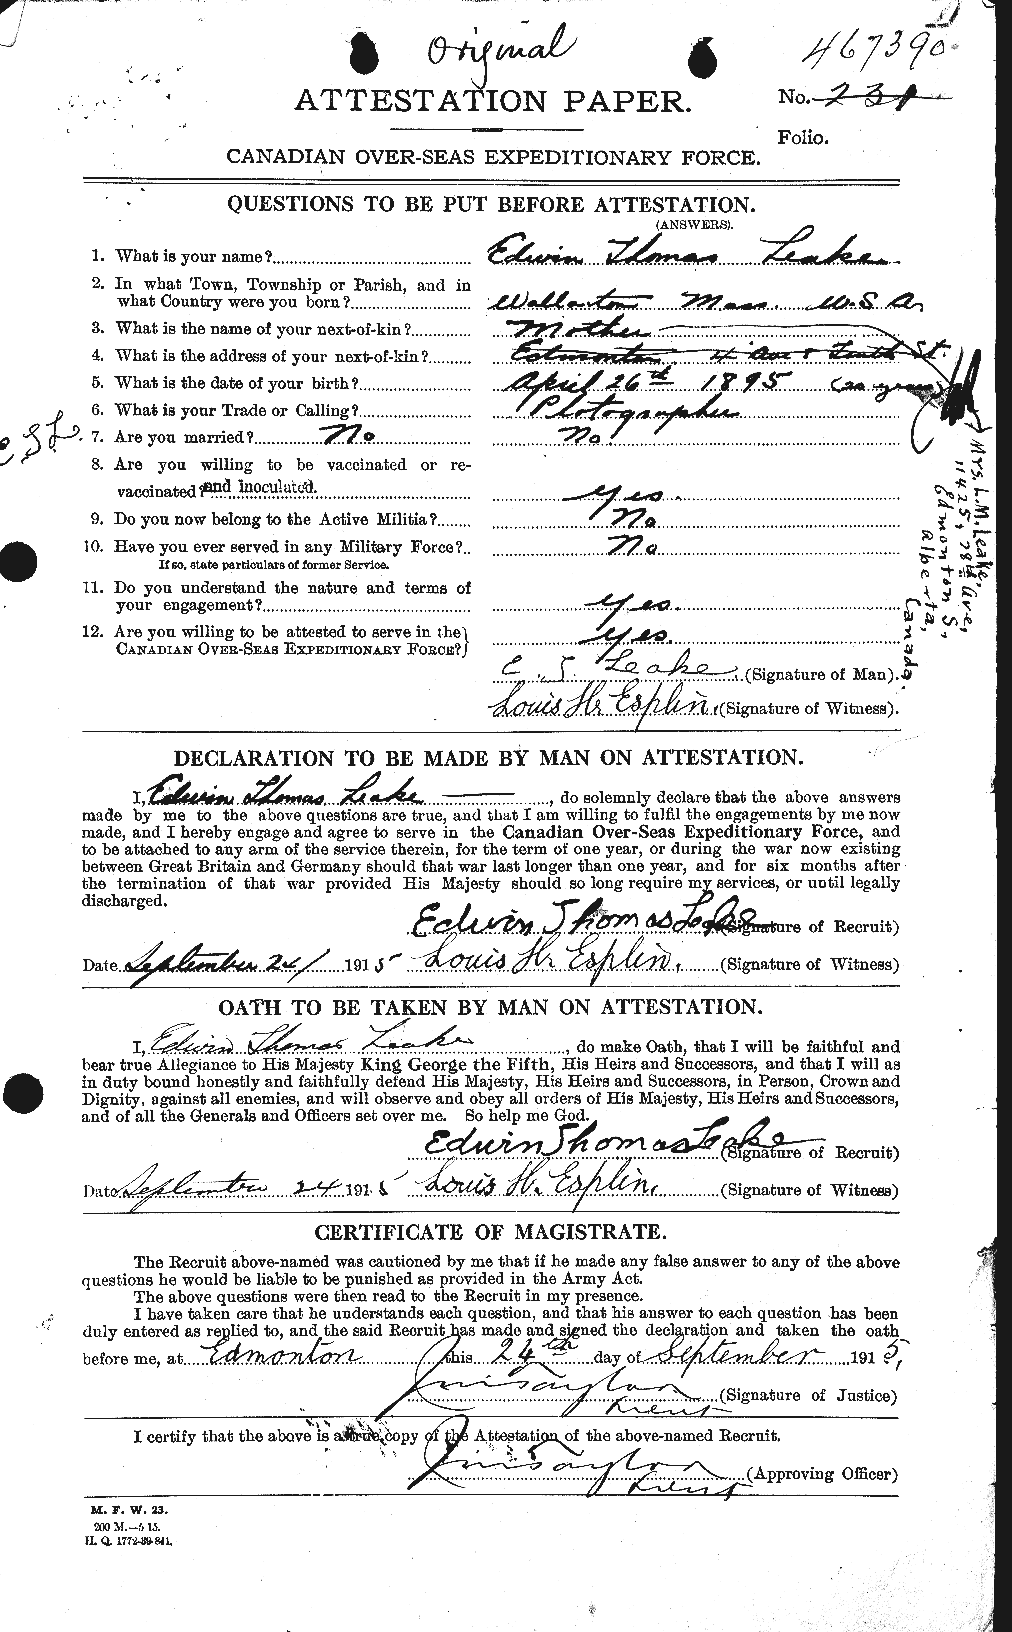 Personnel Records of the First World War - CEF 455978a